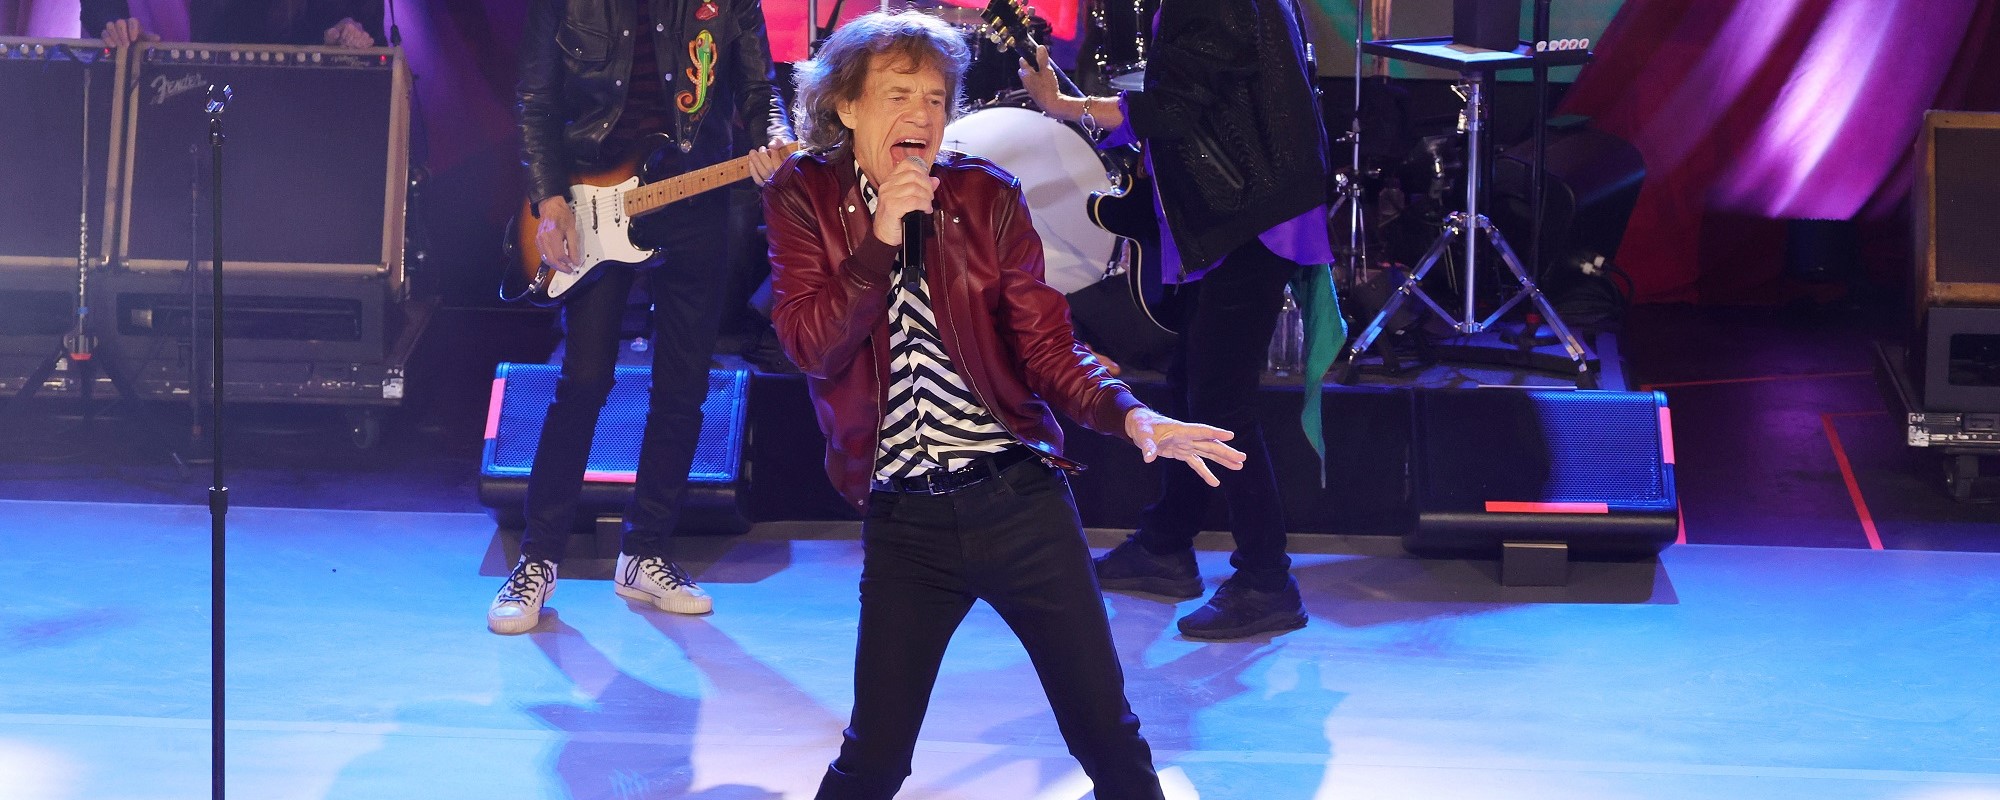 Mick Jagger’s Son Can’t Unsee His Dad Dancing His Heart Out to “Moves Like Jagger”